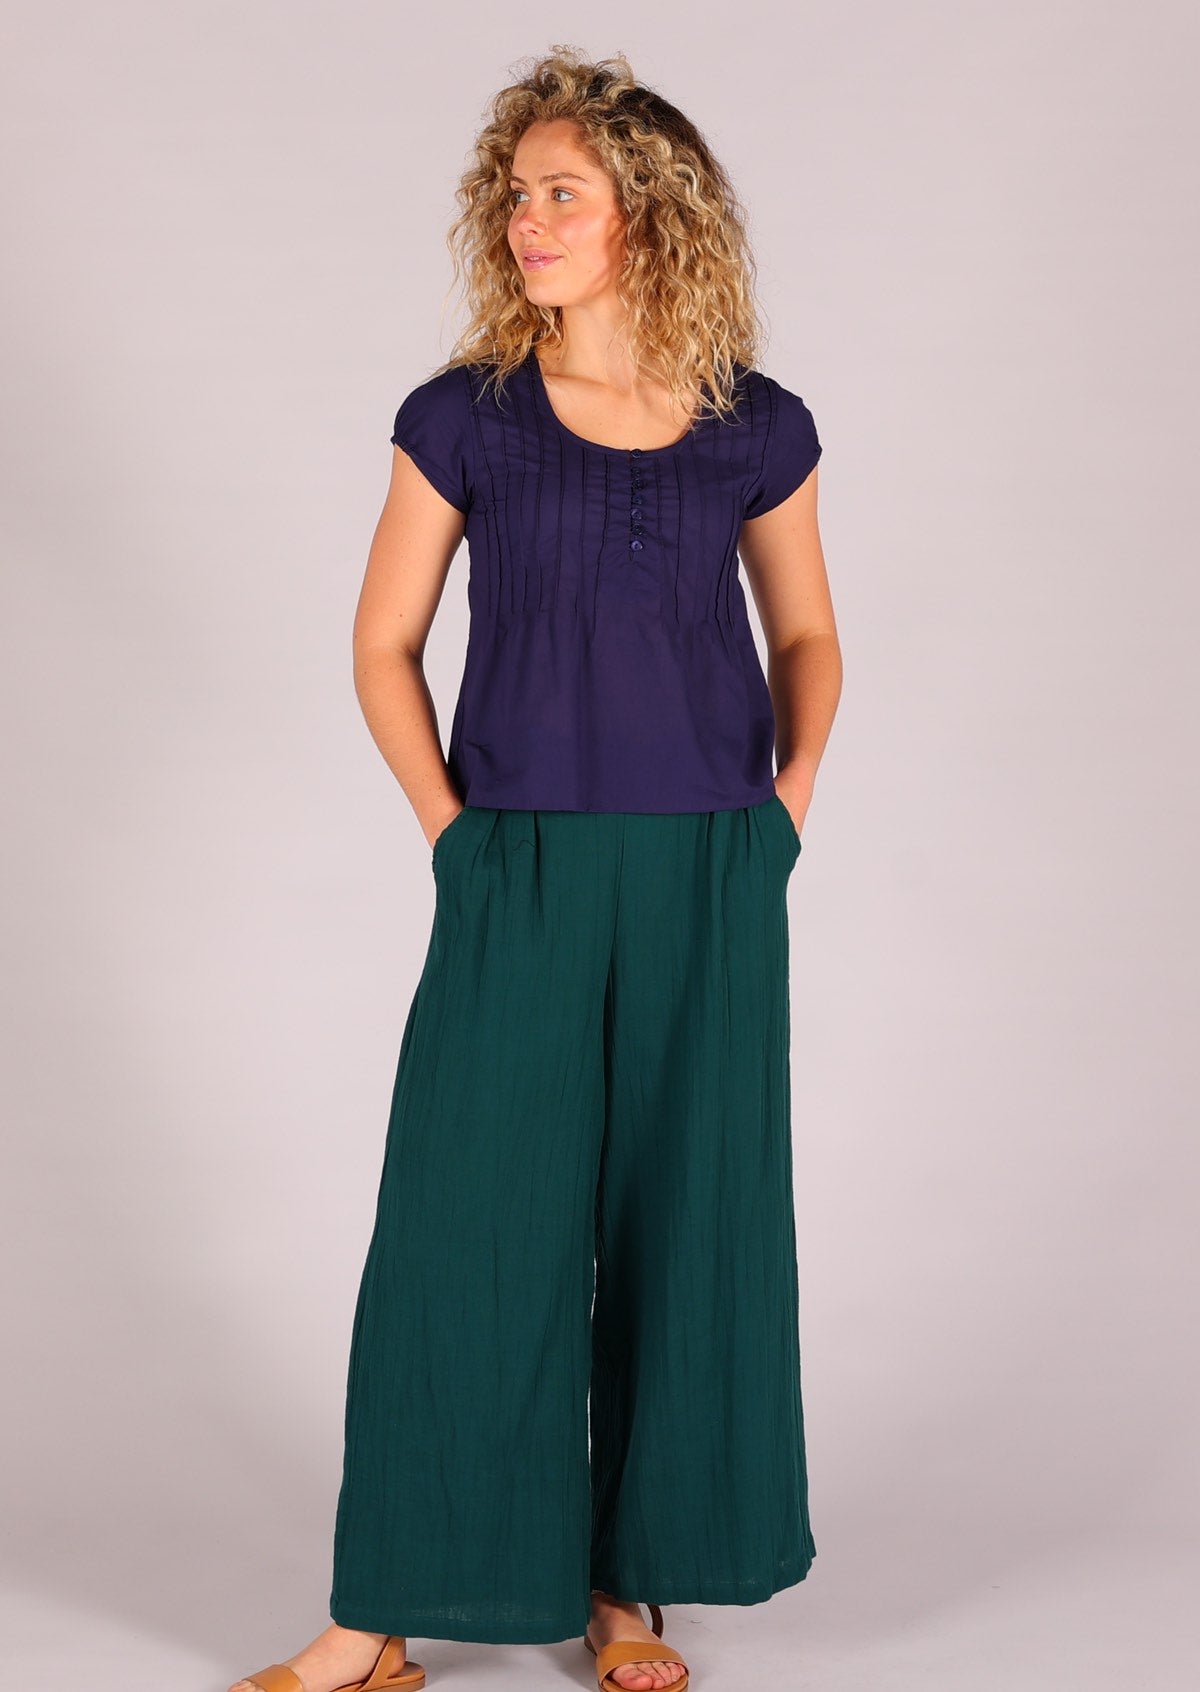 Deep teal double cotton pants with pockets will be the most comfortable pants you've ever worn!